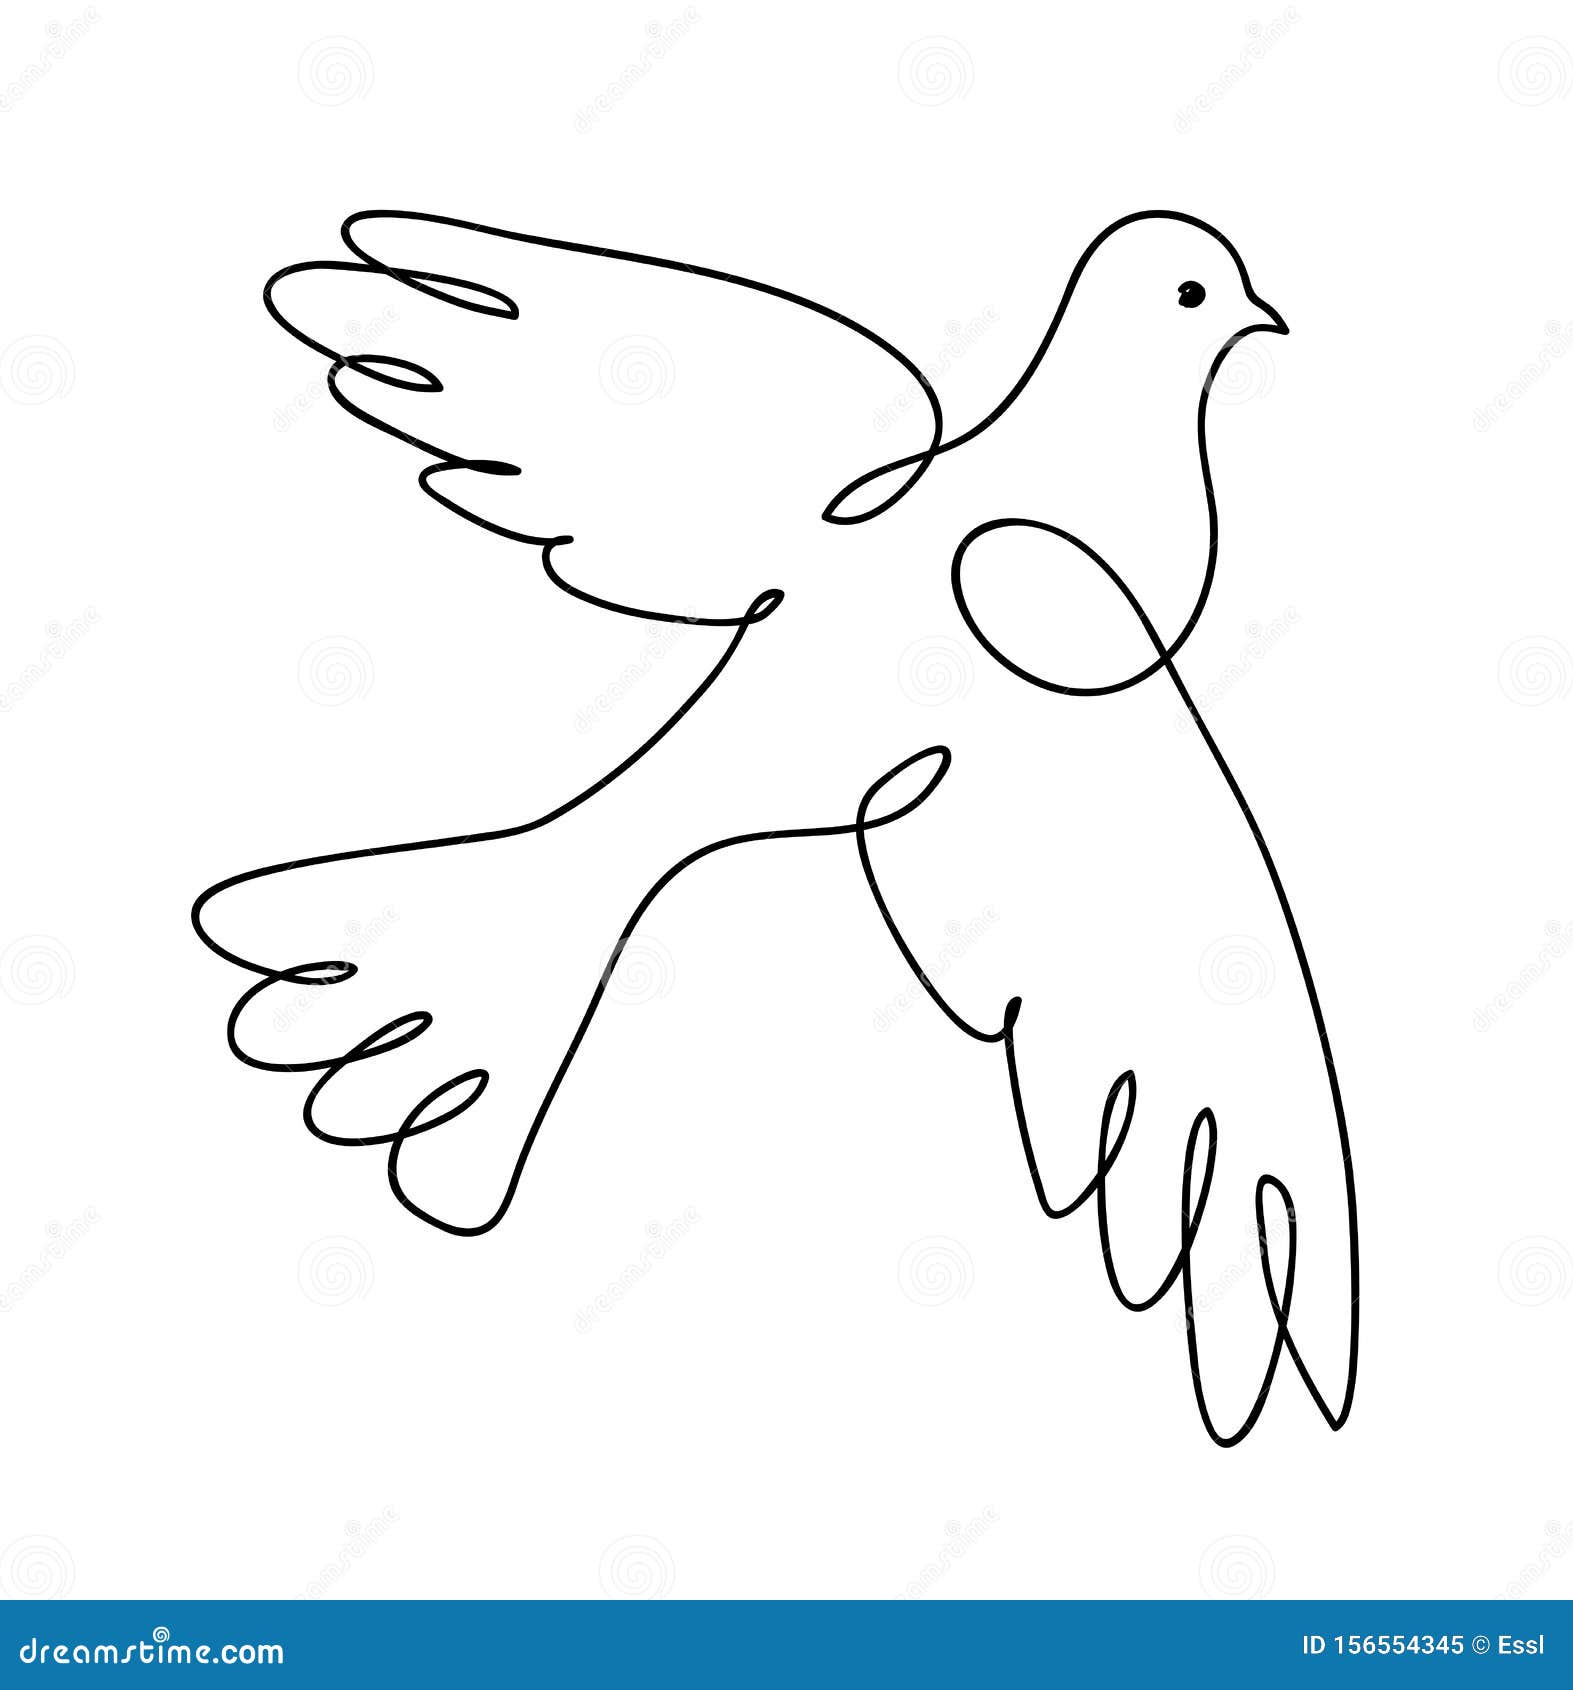 Sketch of a pigeon stock vector. Illustration of sketch - 77409076